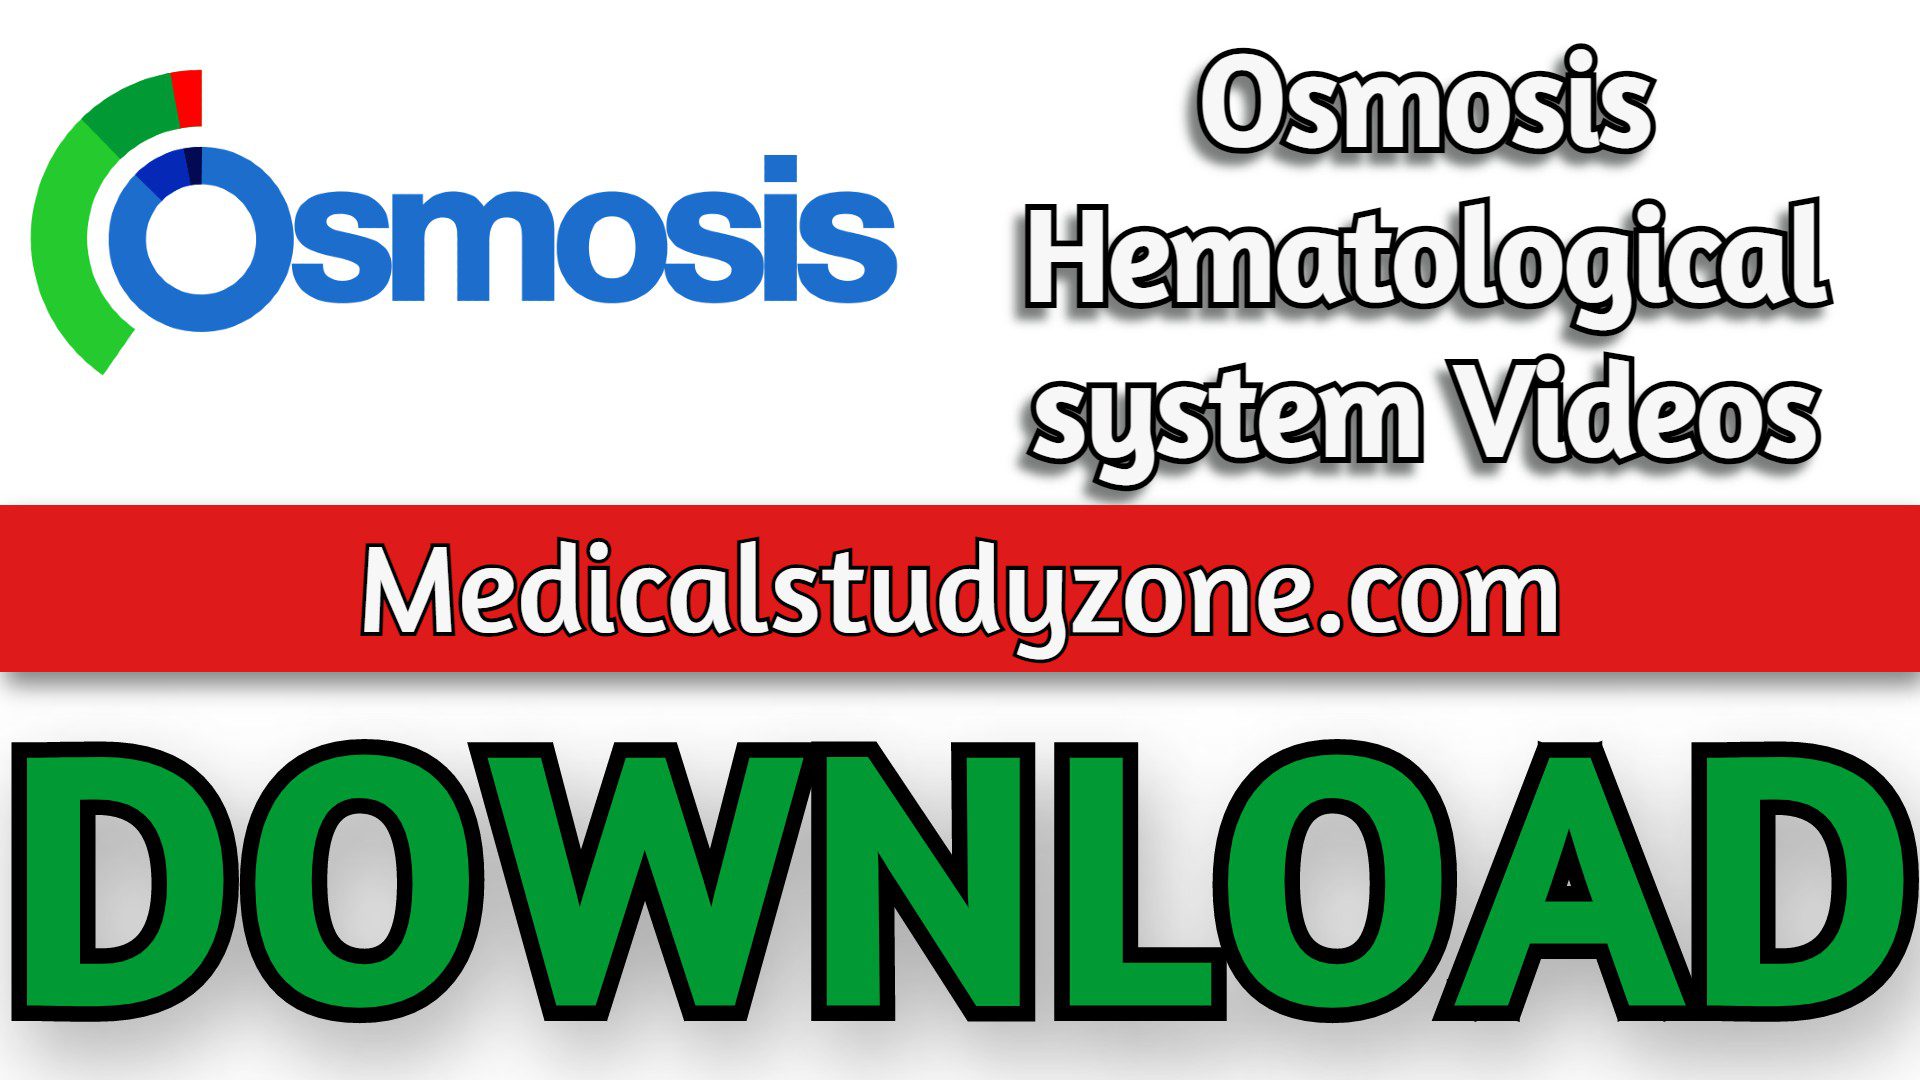 Osmosis Hematological system Videos 2022 Free Download